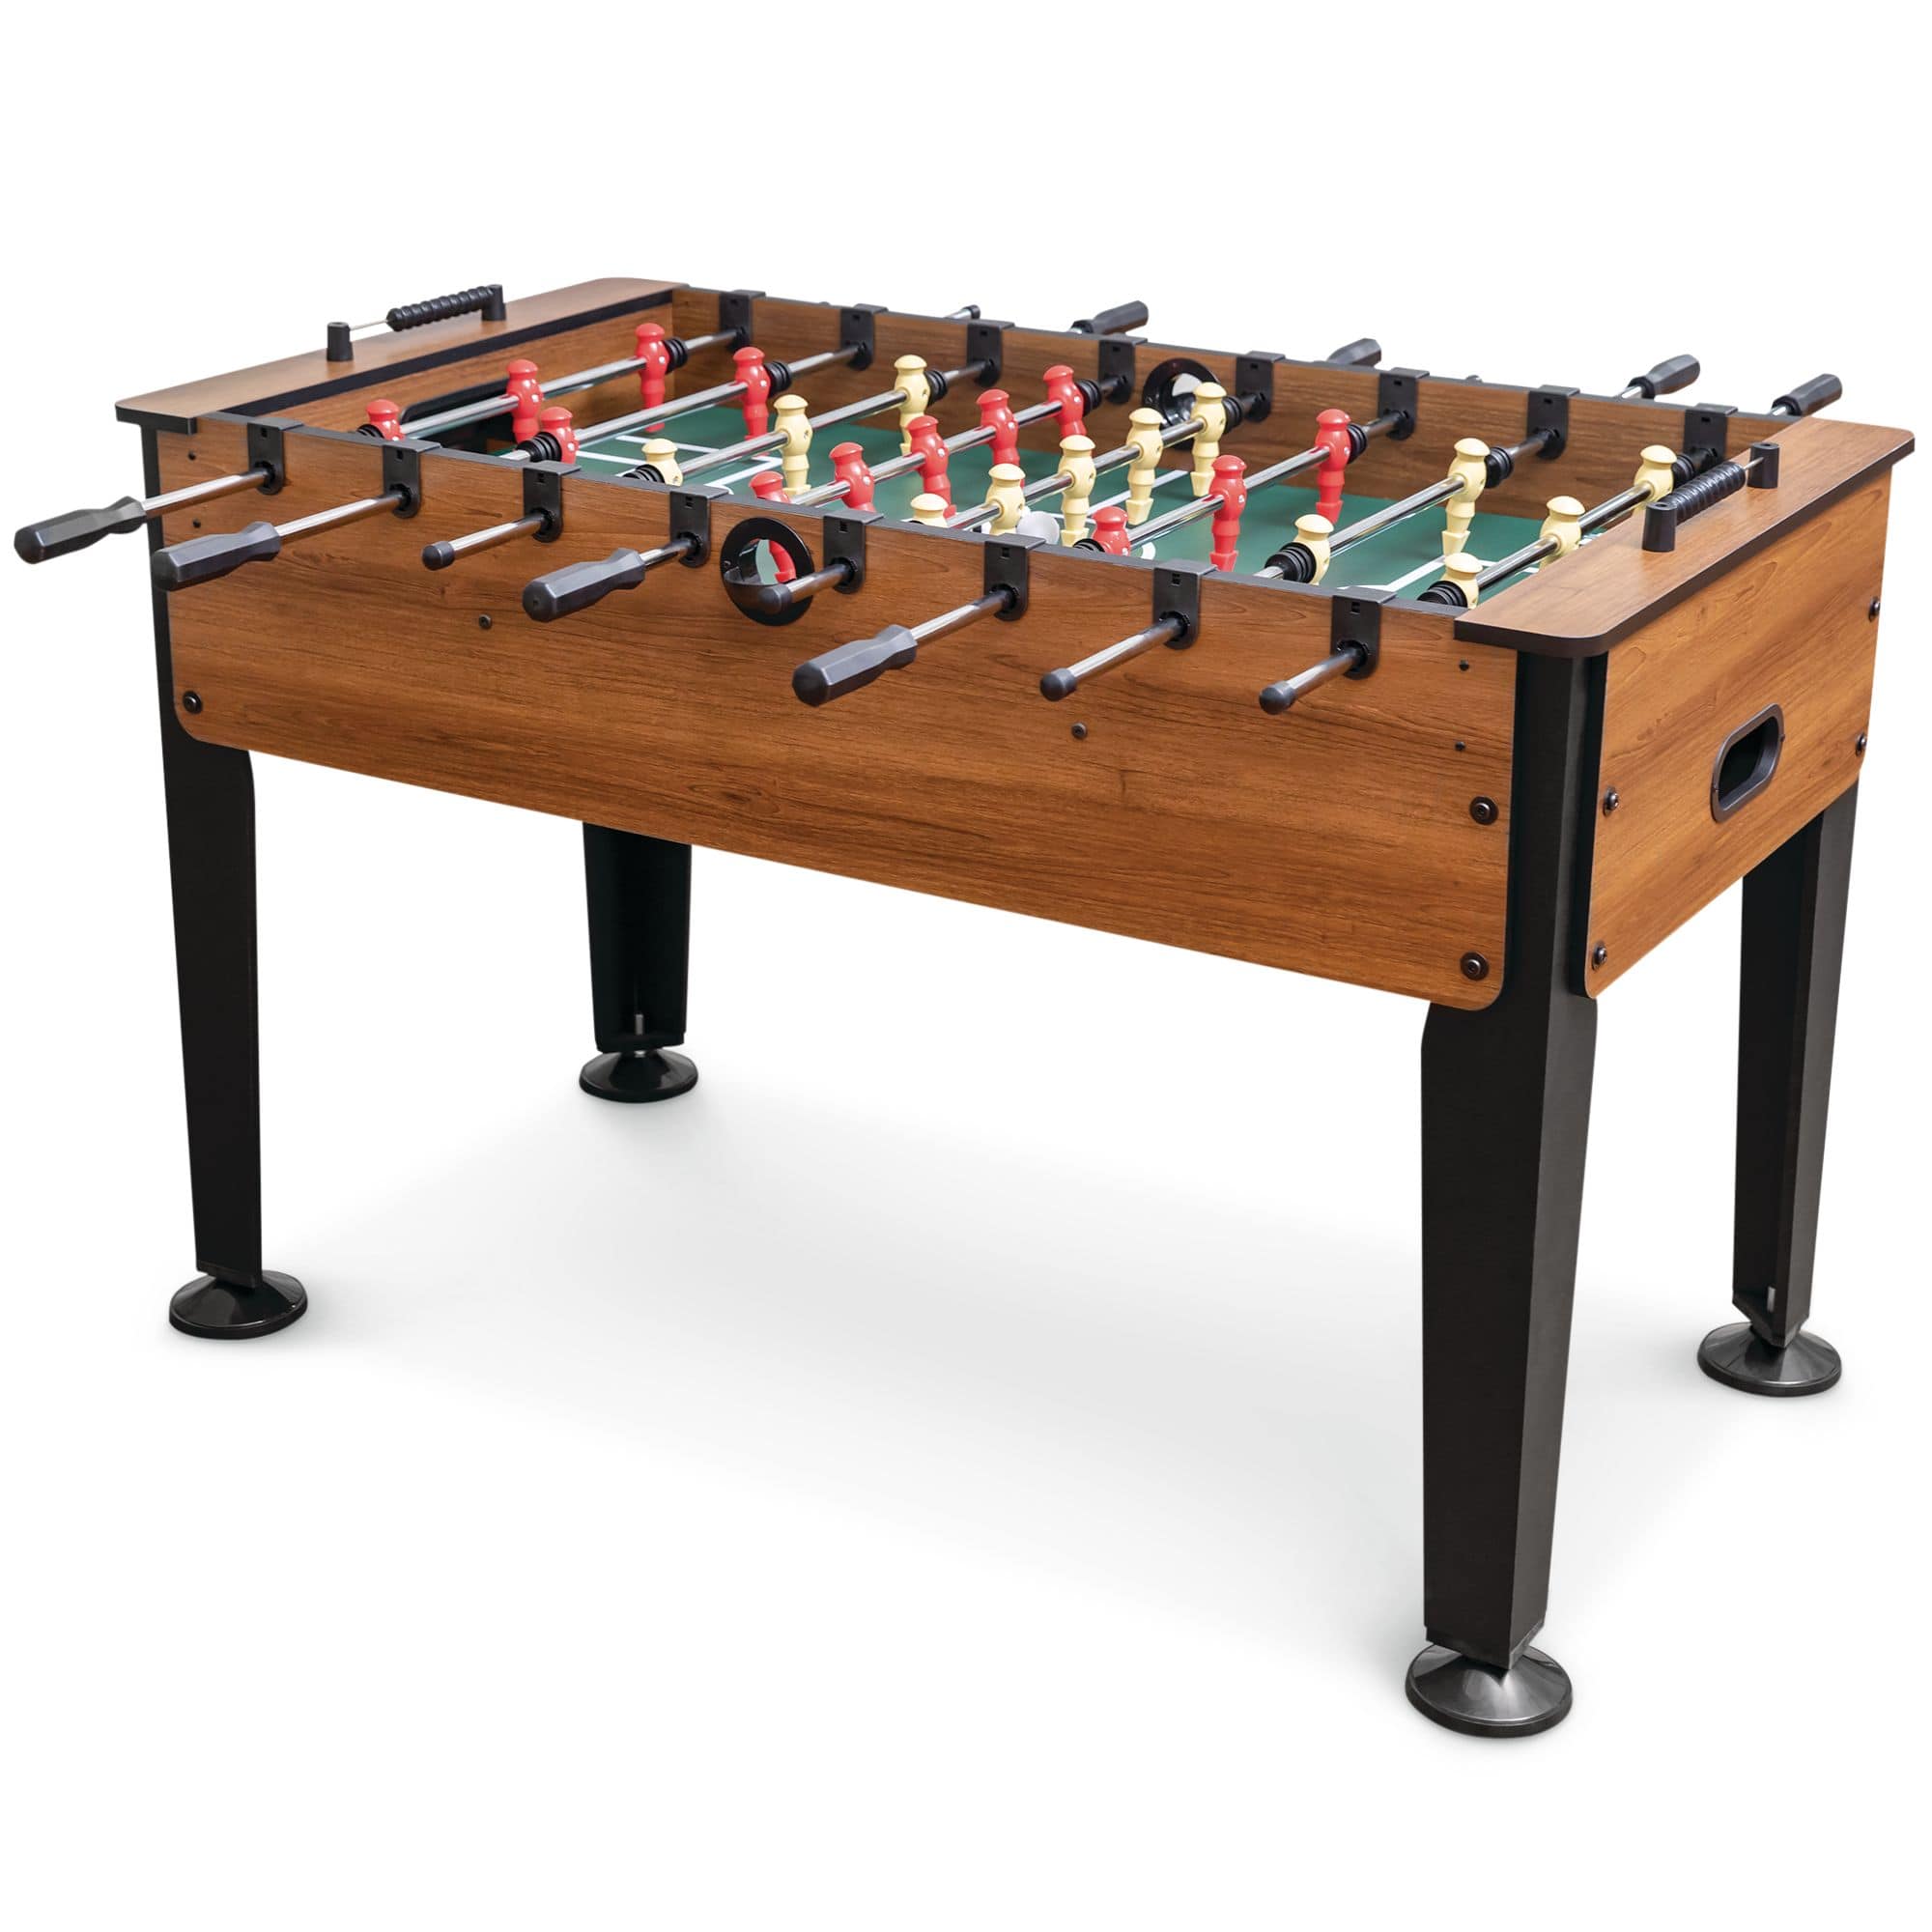 EastPoint Newcastle Foosball Soccer Game Table w/ 2 Balls, Wood Finish, 54-in EastPoint Sports